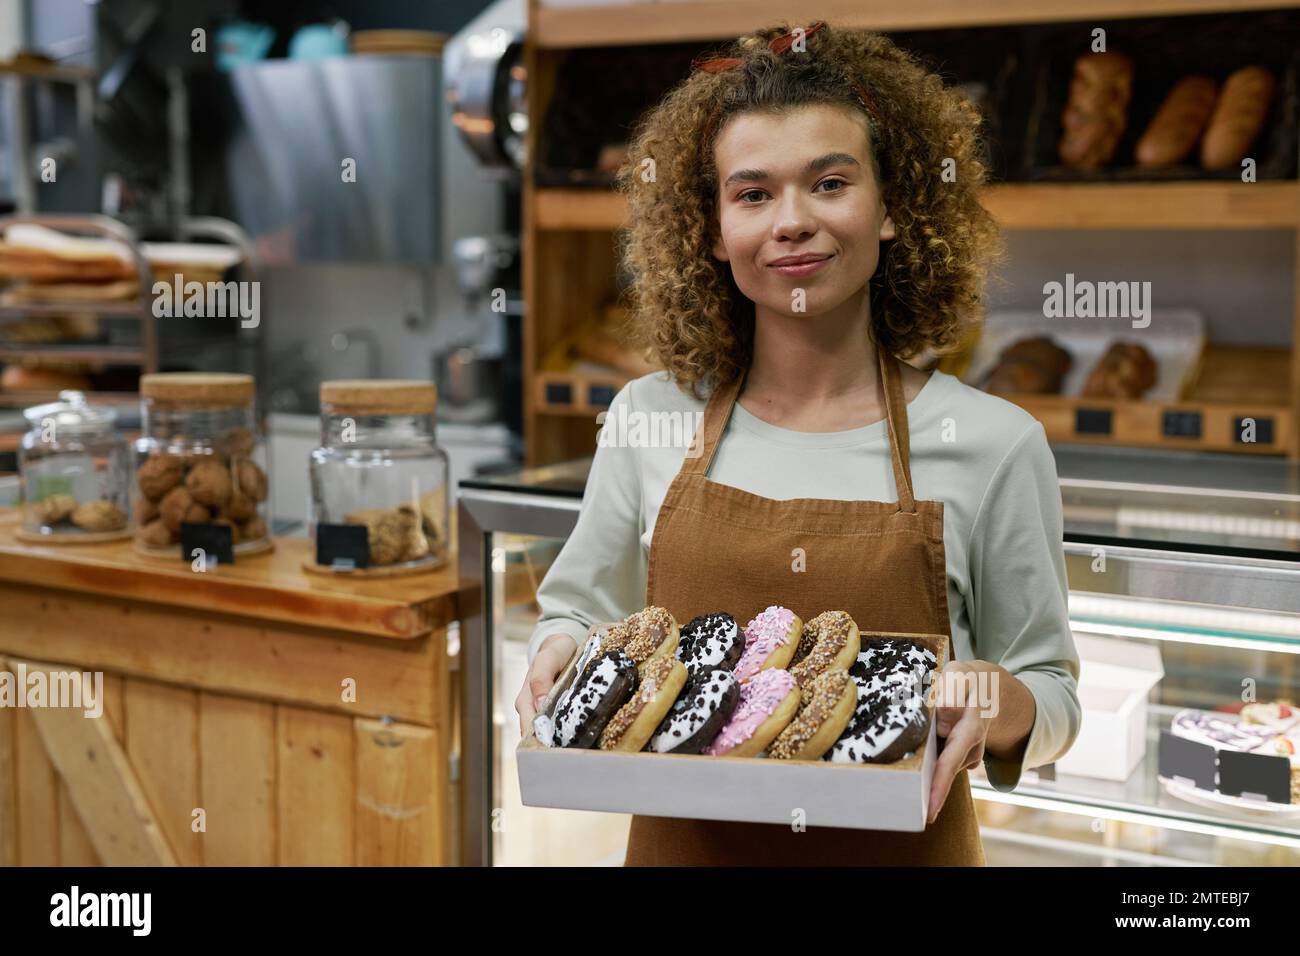 Positive baker holding box of delicious glazed donuts of different colors Stock Photo